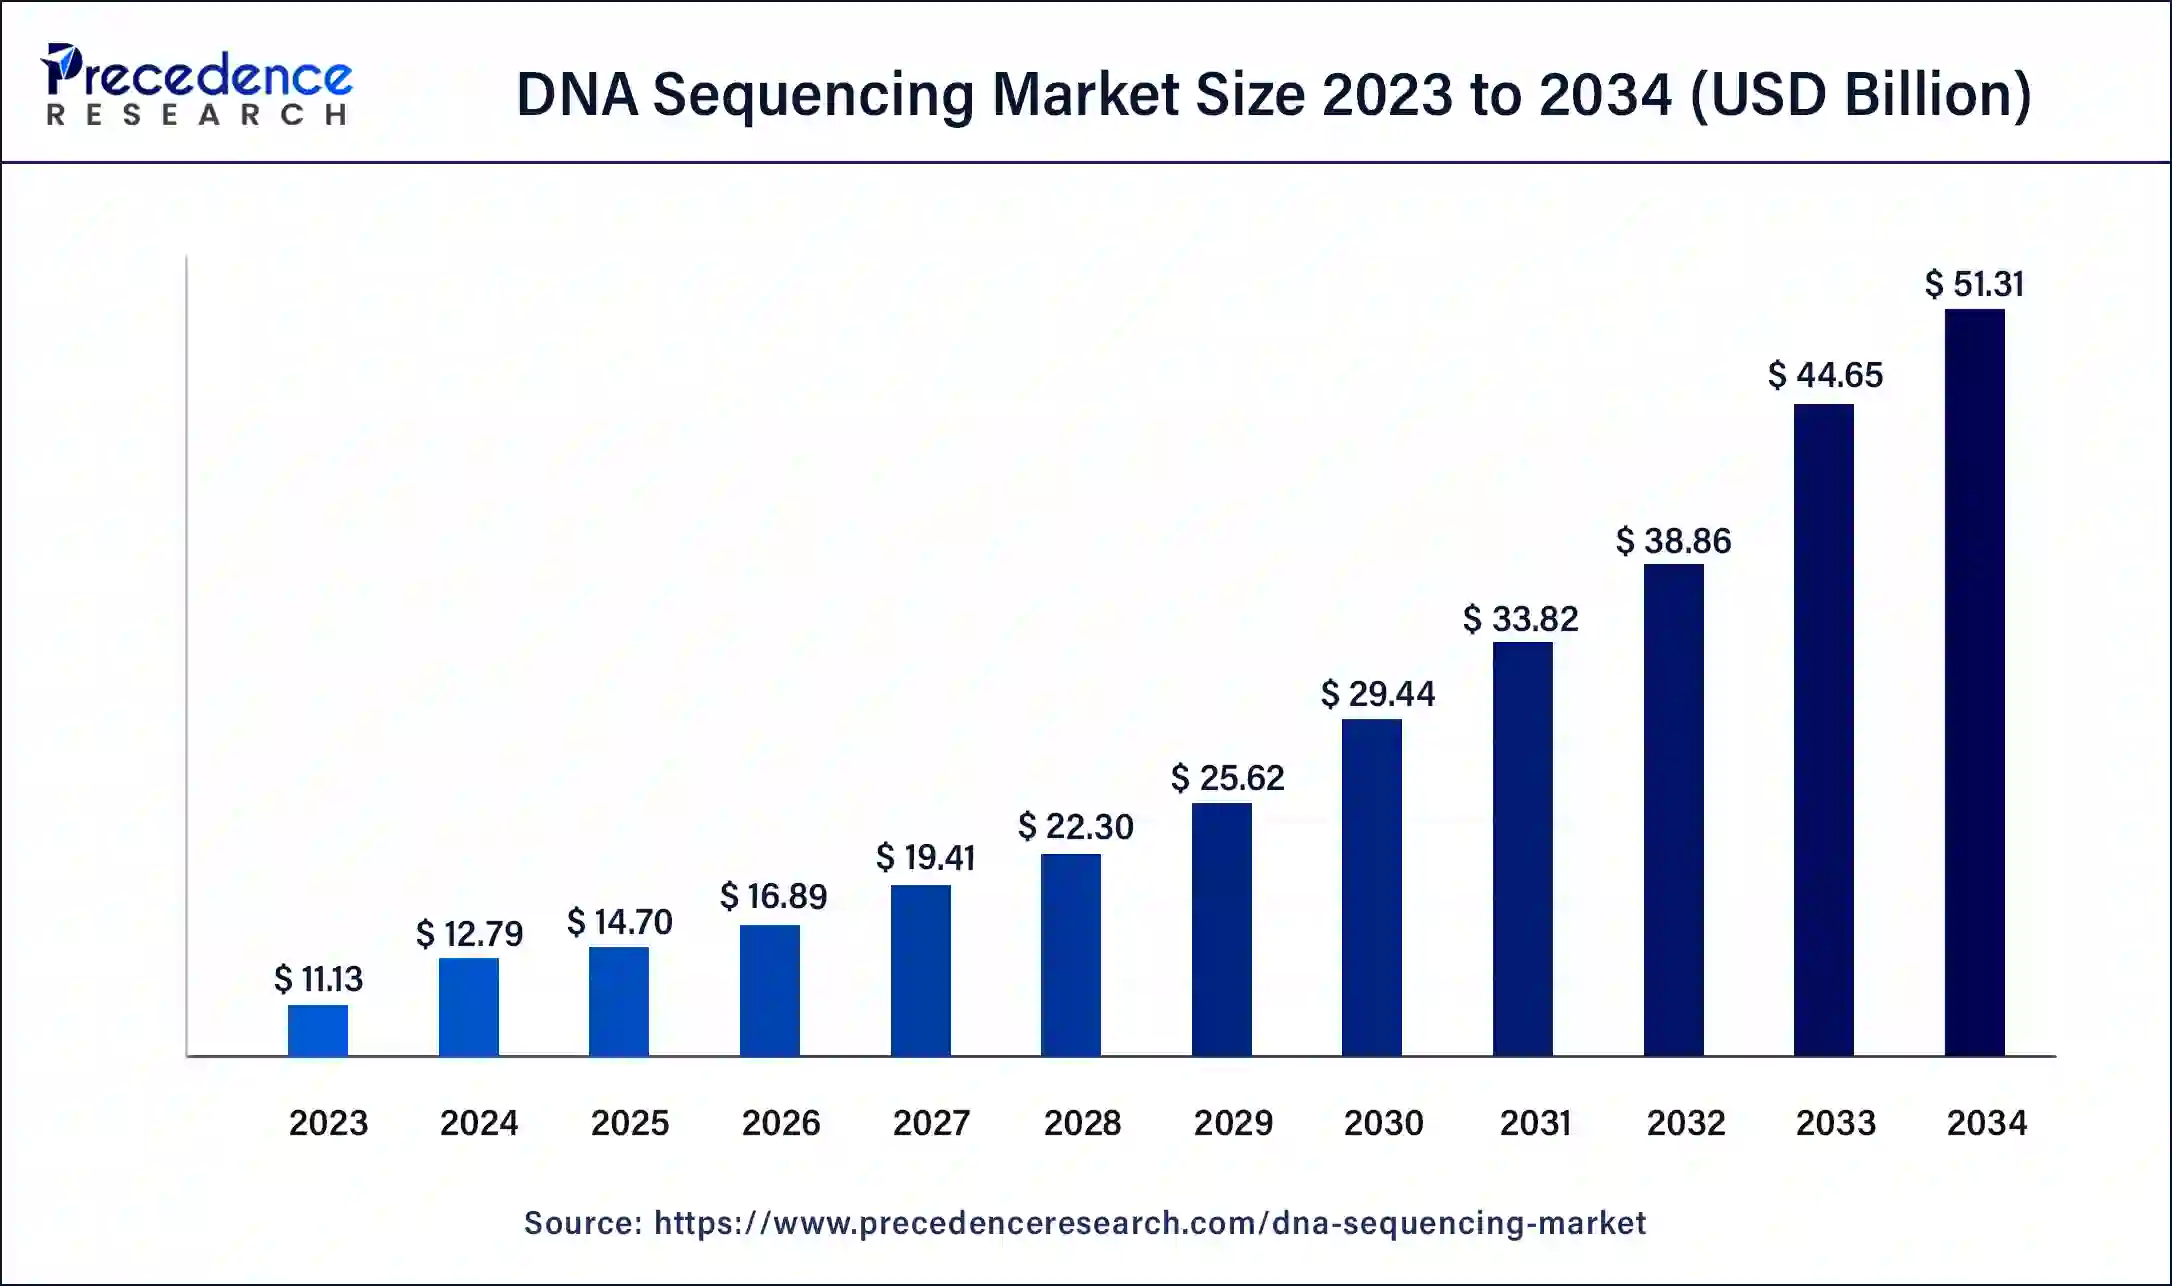 DNA Sequencing Market Size 2024 to 2034